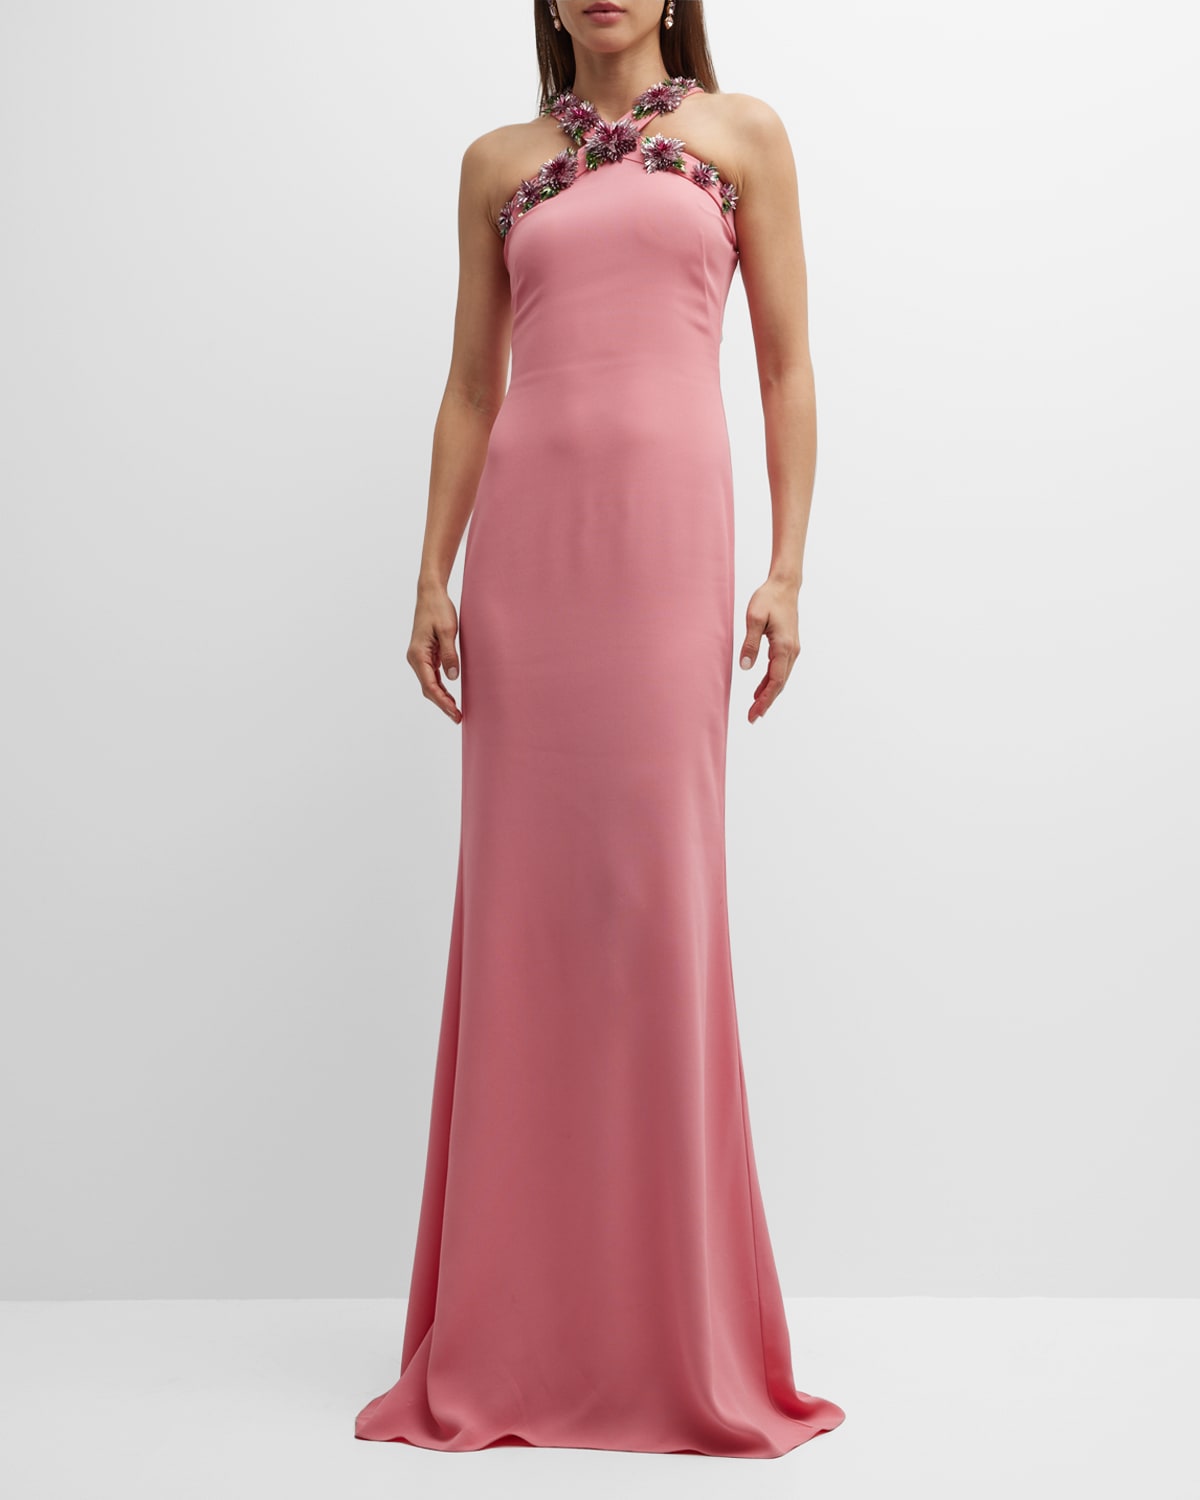 Crystal Dahlia Embroidered Halter Crepe Gown